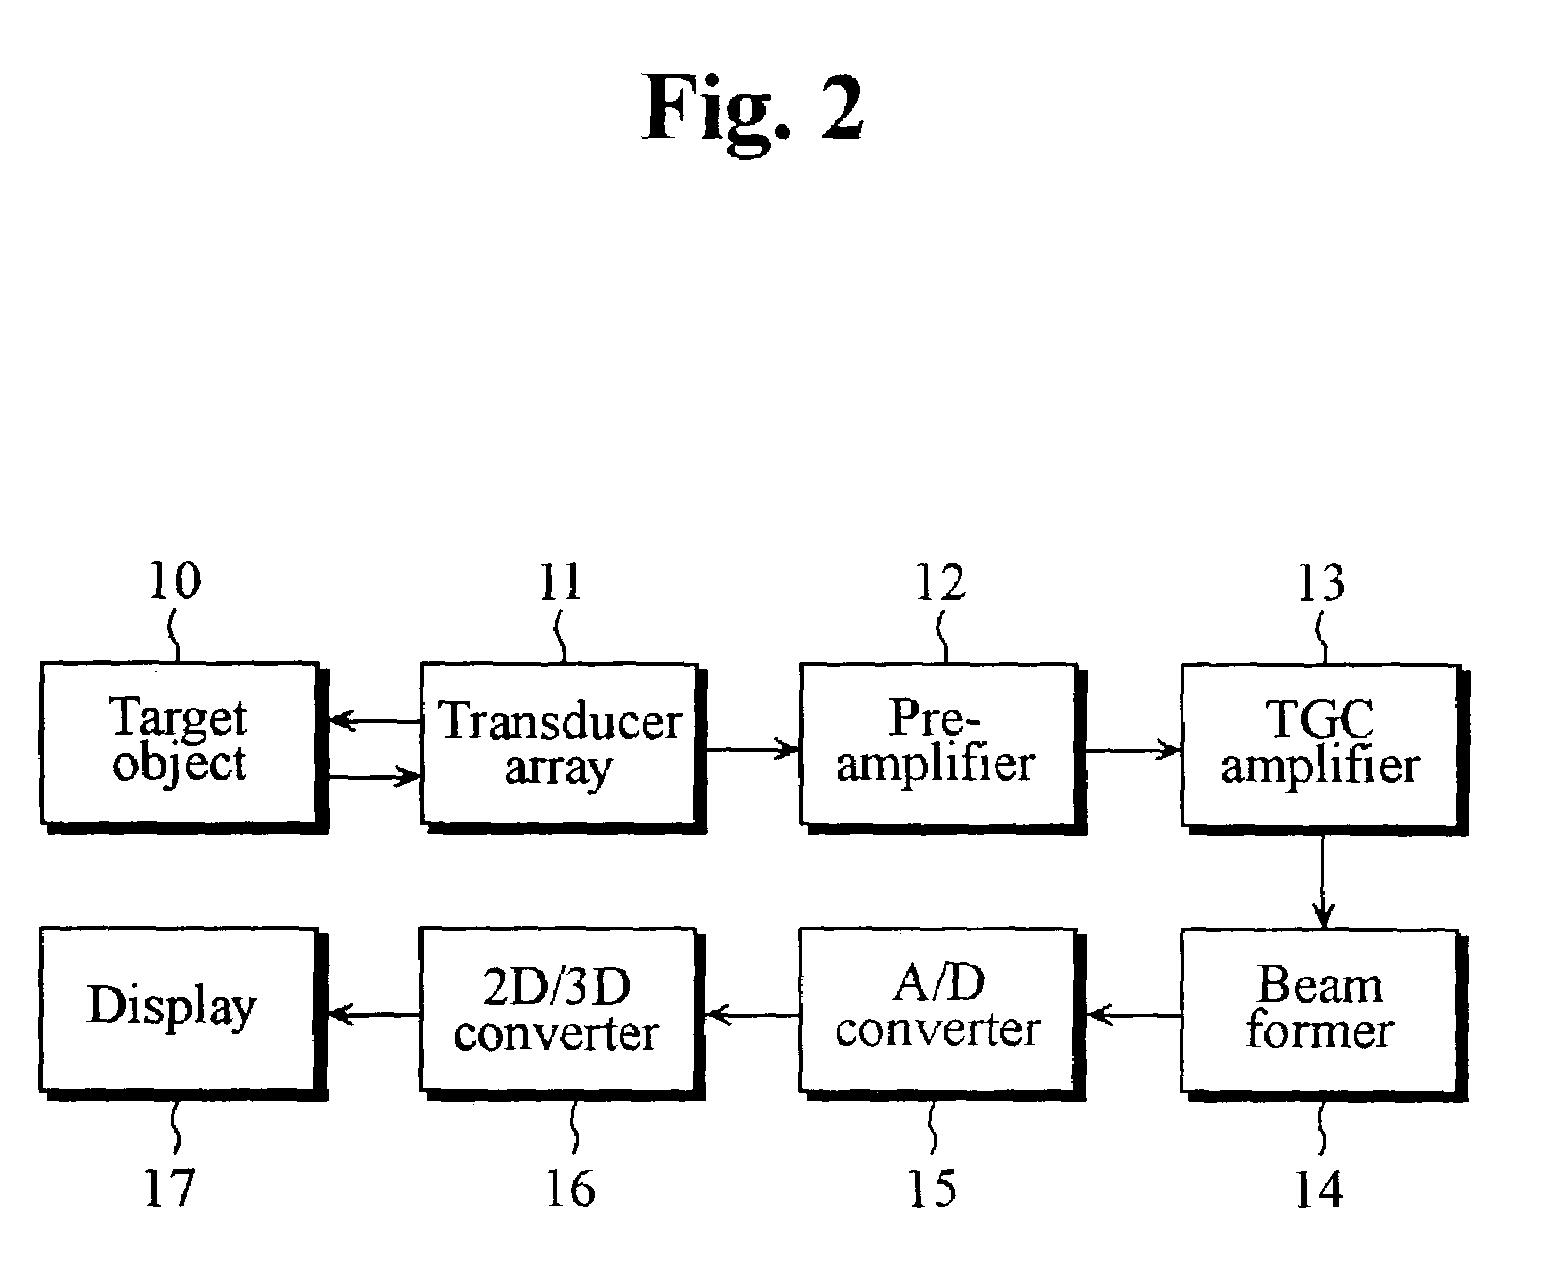 Three-dimensional ultrasound imaging method and apparatus using lateral distance correlation function